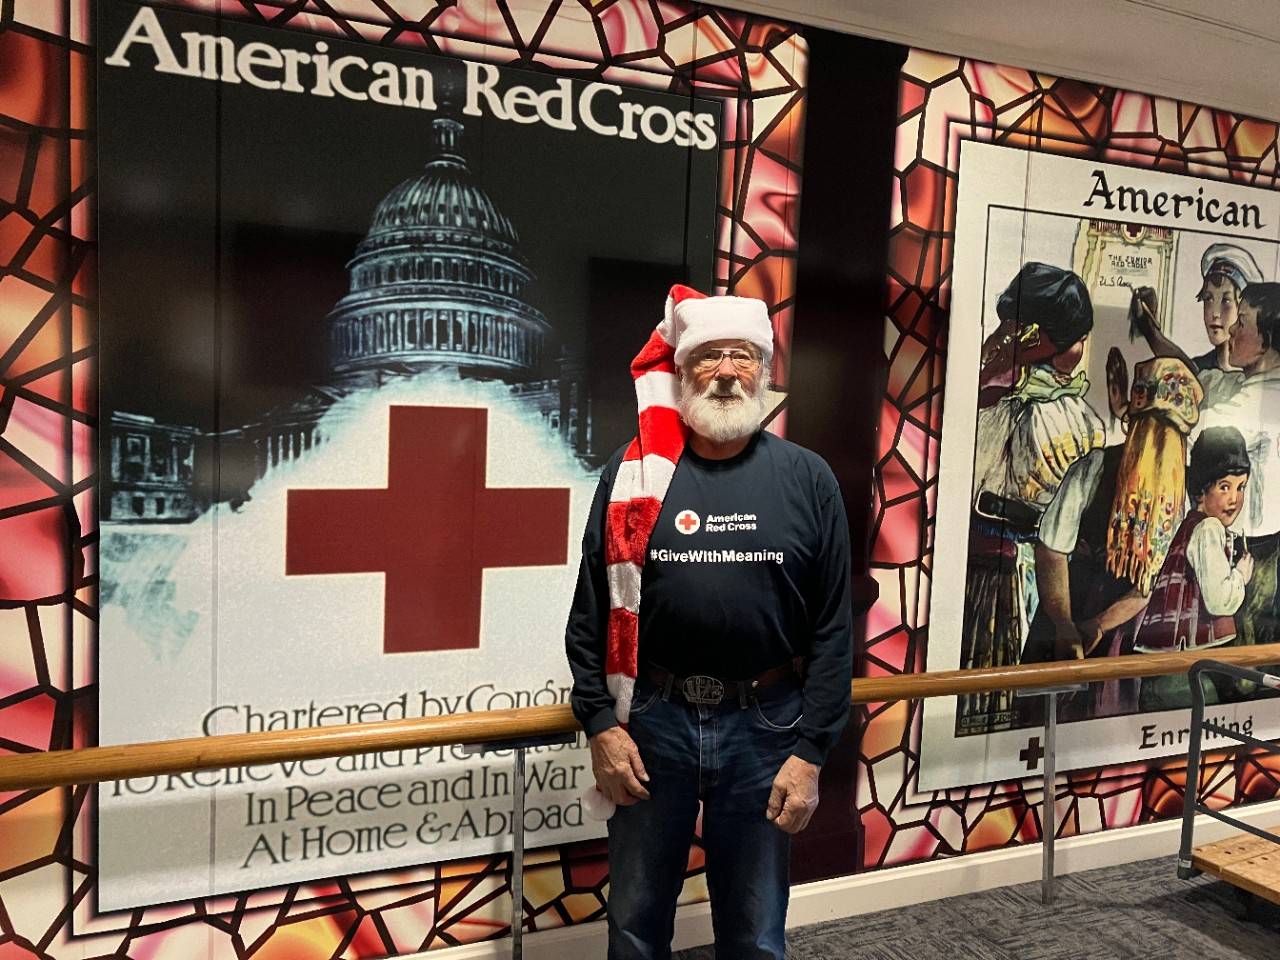 Red Cross - Message, Symbol & Founder